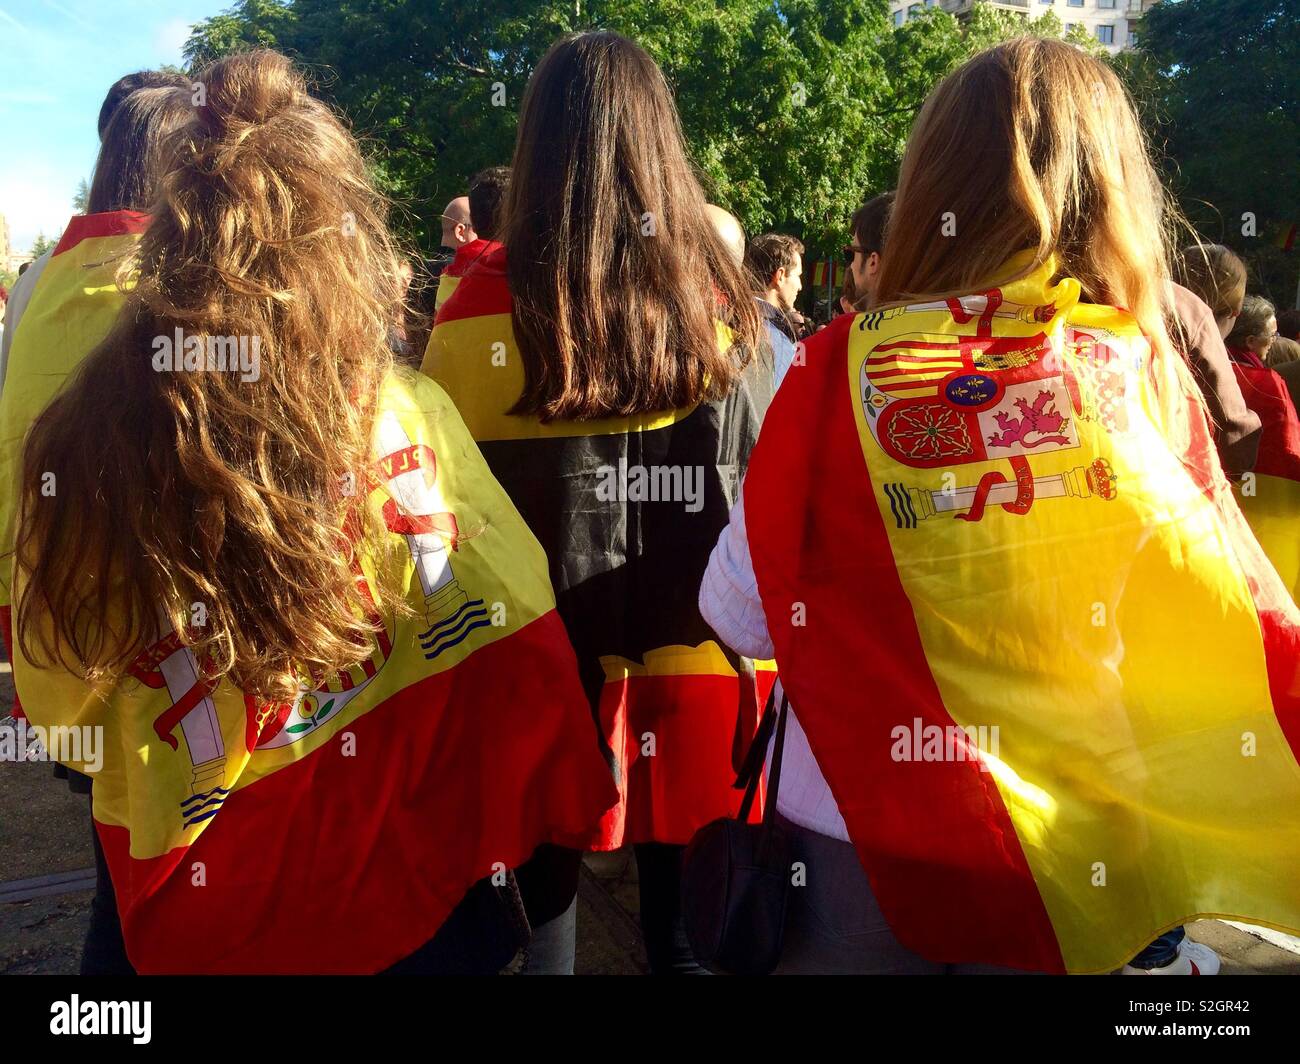 Spanish flags wrapped around the shoulders of three women watching the national day celebrations in the streets of Madrid in Spain Stock Photo